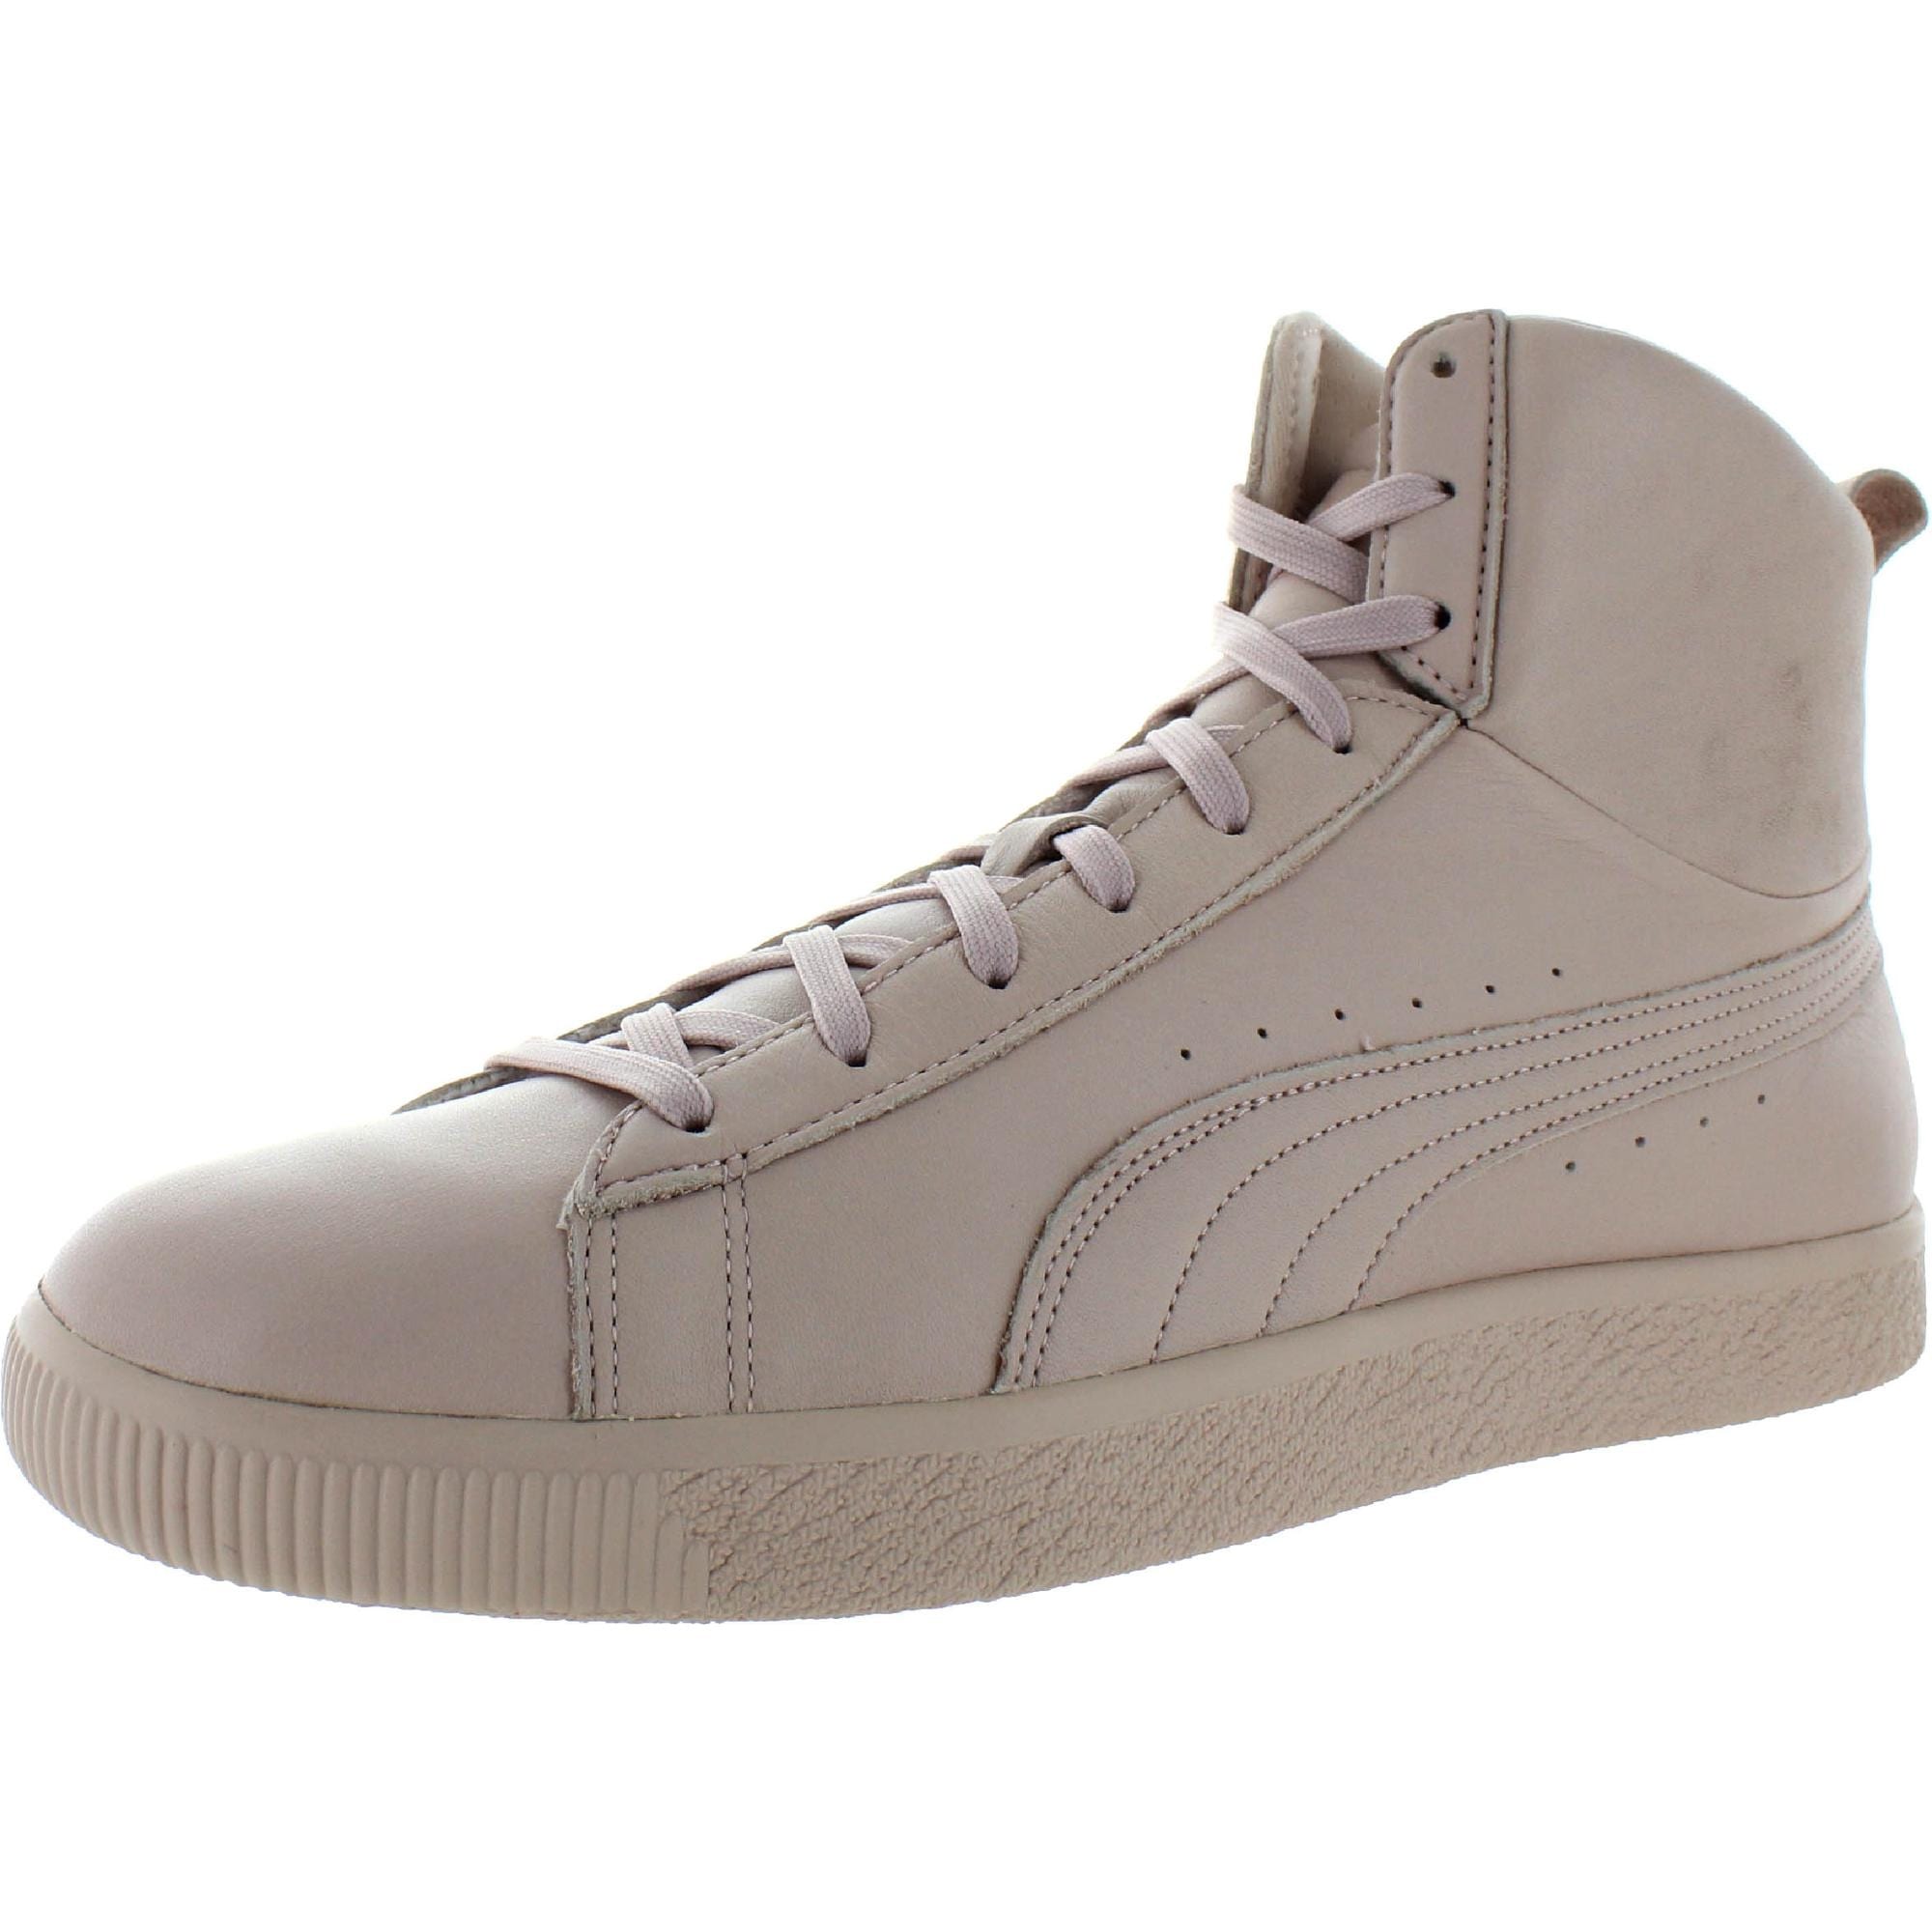 Puma Mens Clyde Mid Sneakers Leather 